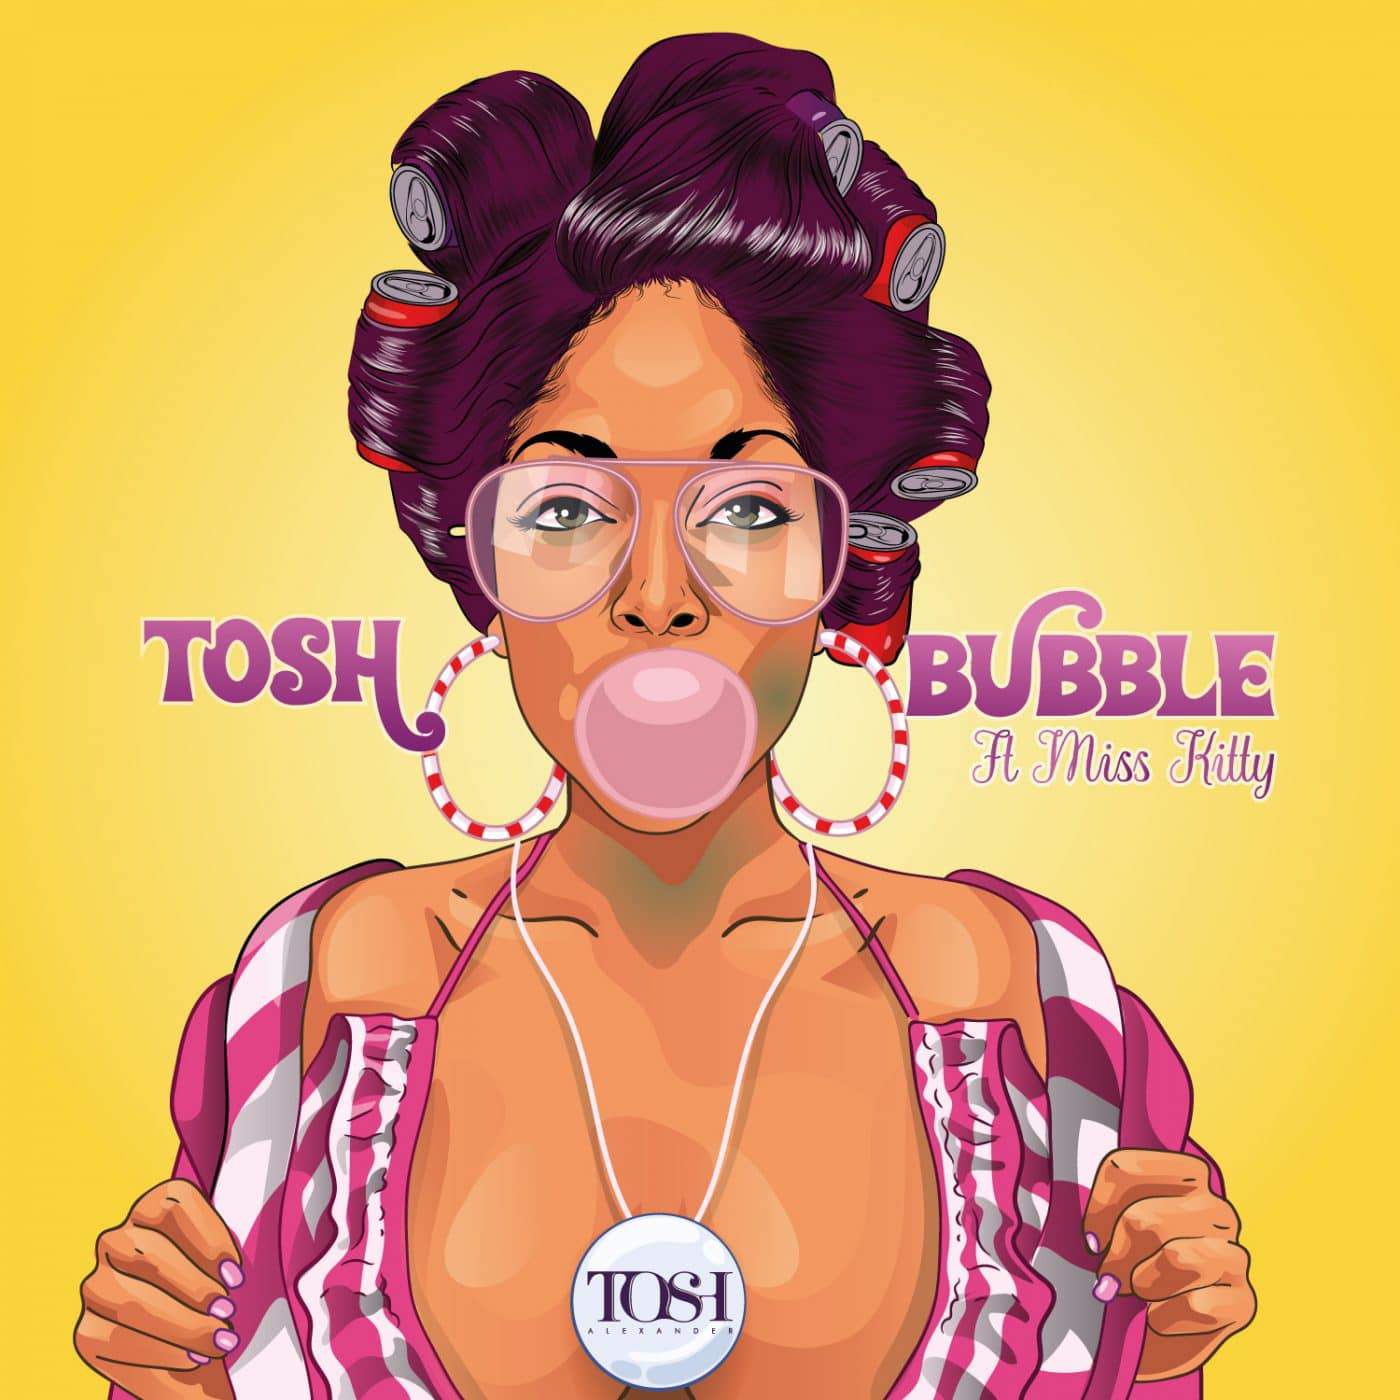 Tosh - Bubble ft Miss Kitty - Raw